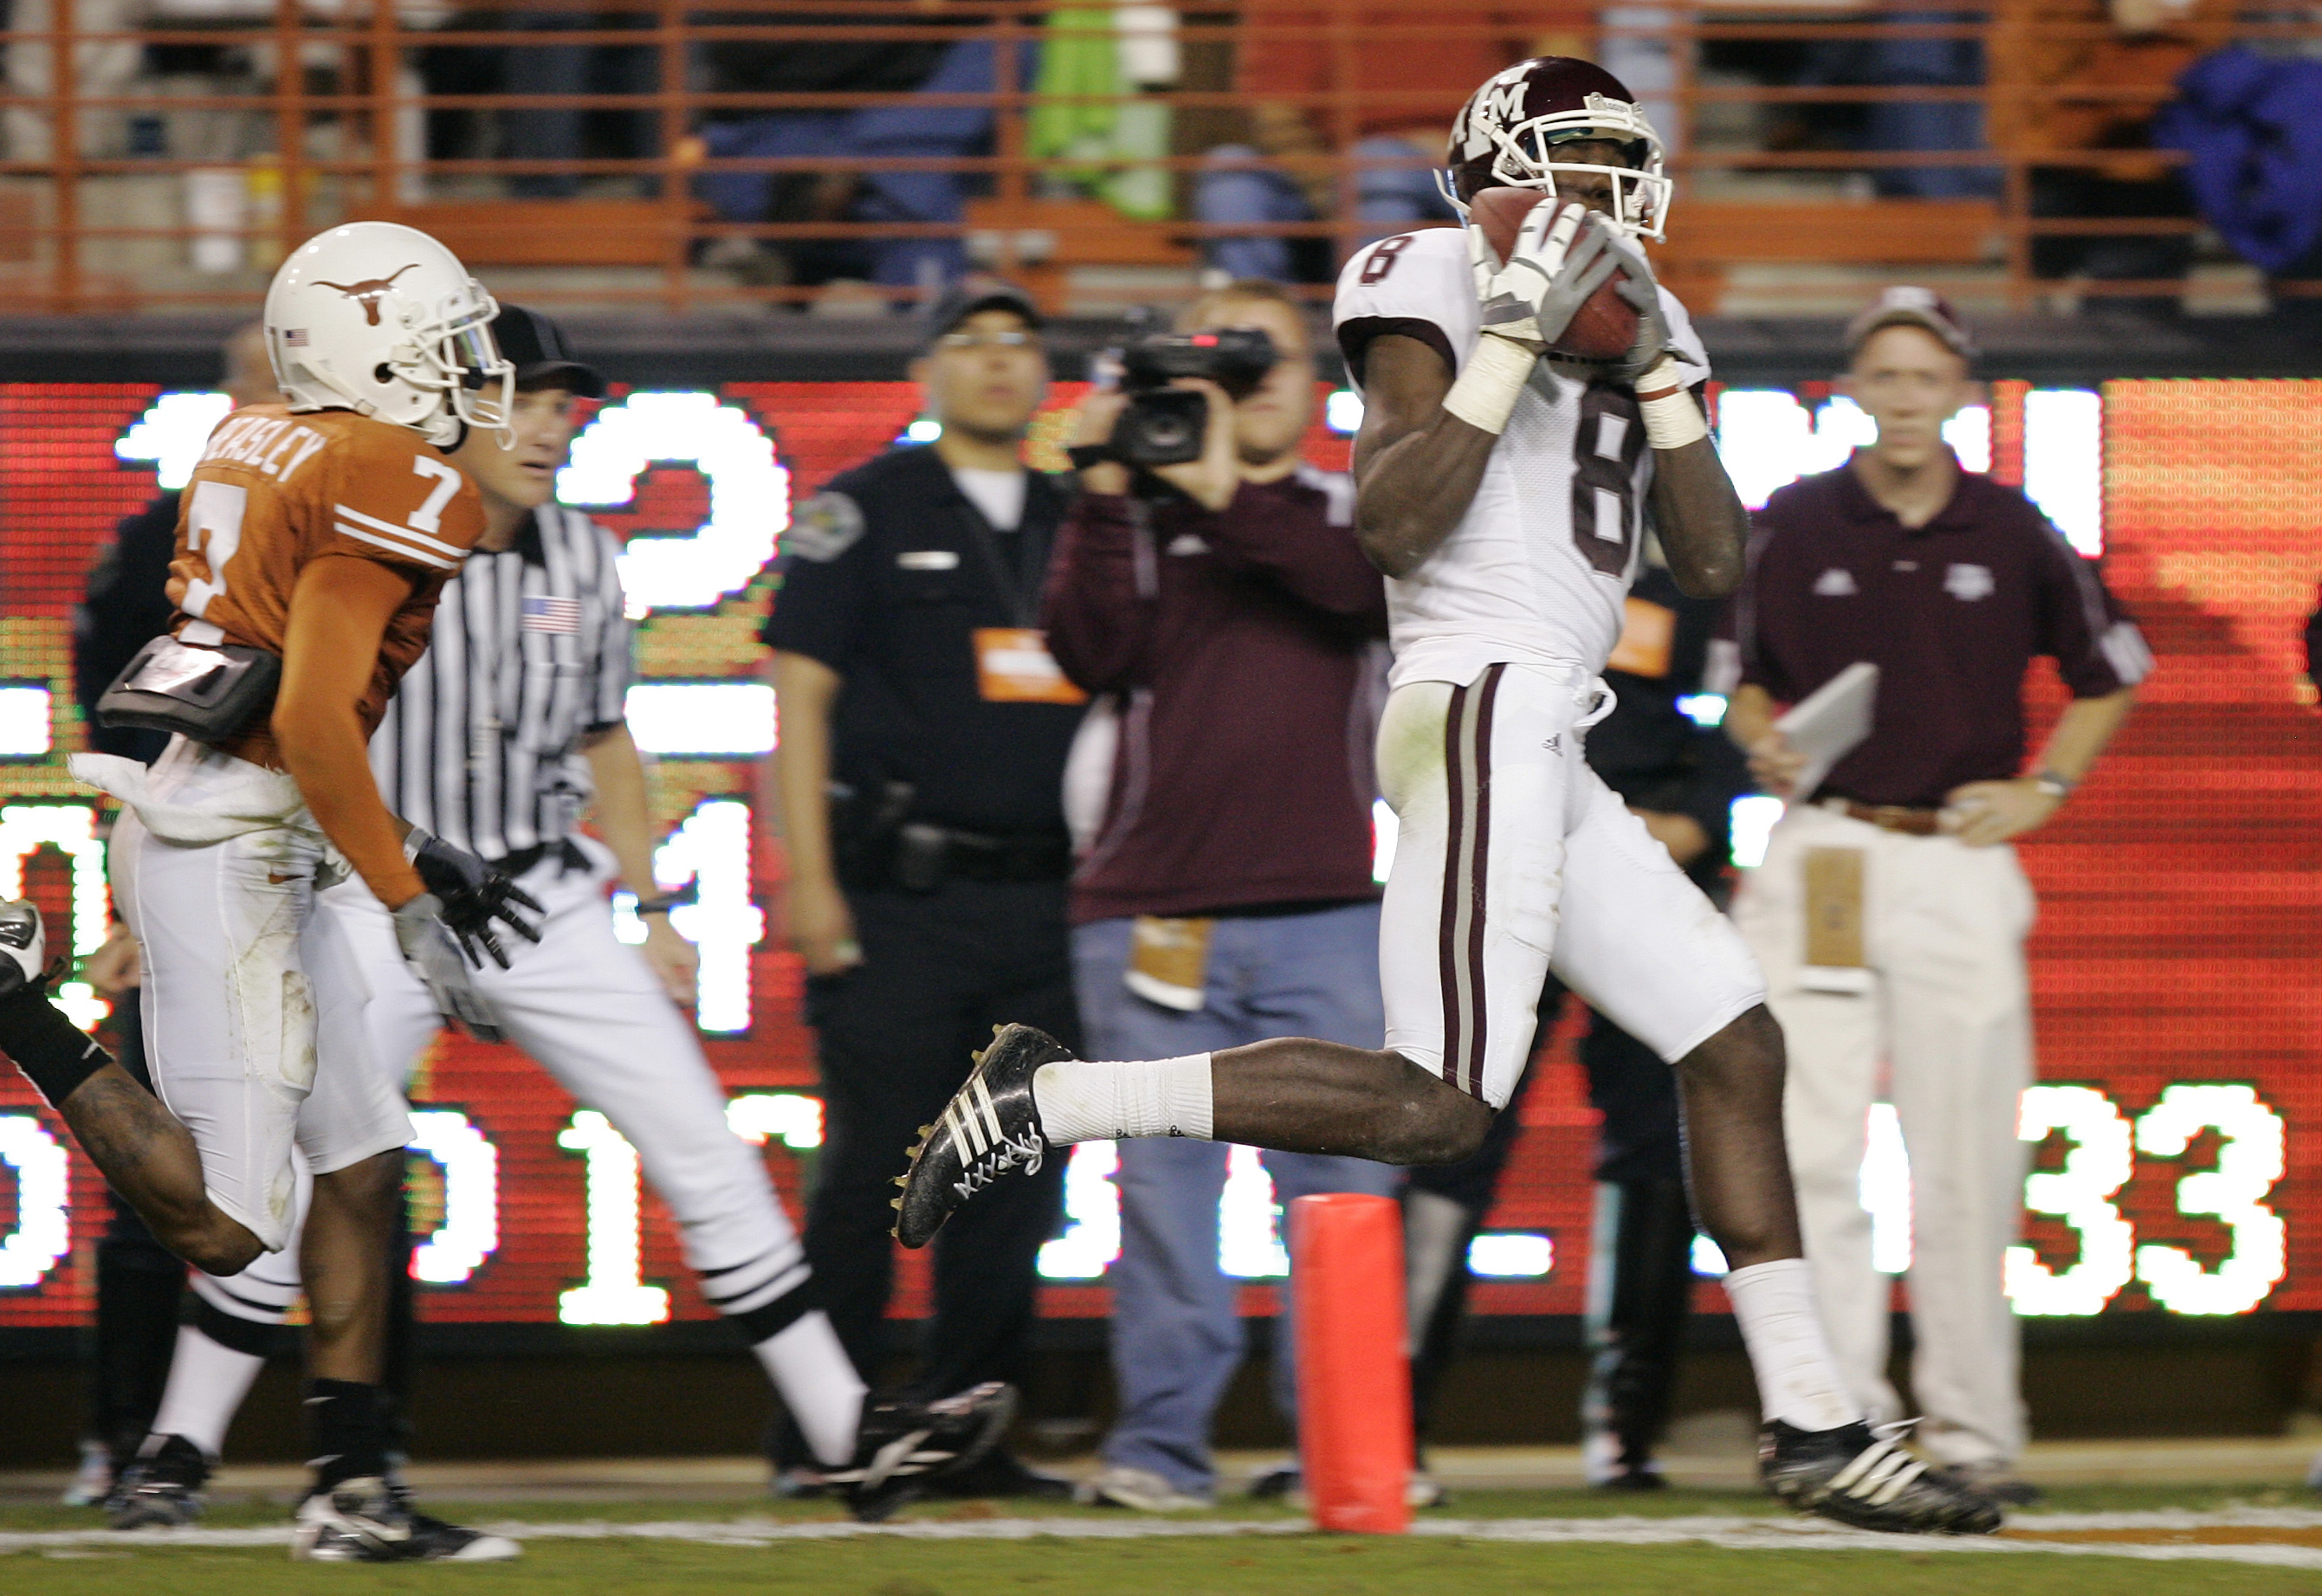 AUSTIN, TX - NOVEMBER 27: Wide receiver Jeff Fuller #8 of the Texas A&M Aggies pulls in a touchdown pass against cornerback Deon Beasley #7 of the Texas Longhorns in the fourth quarter at Darrell K Royal-Texas Memorial Stadium November 27, 2008 in Austin,